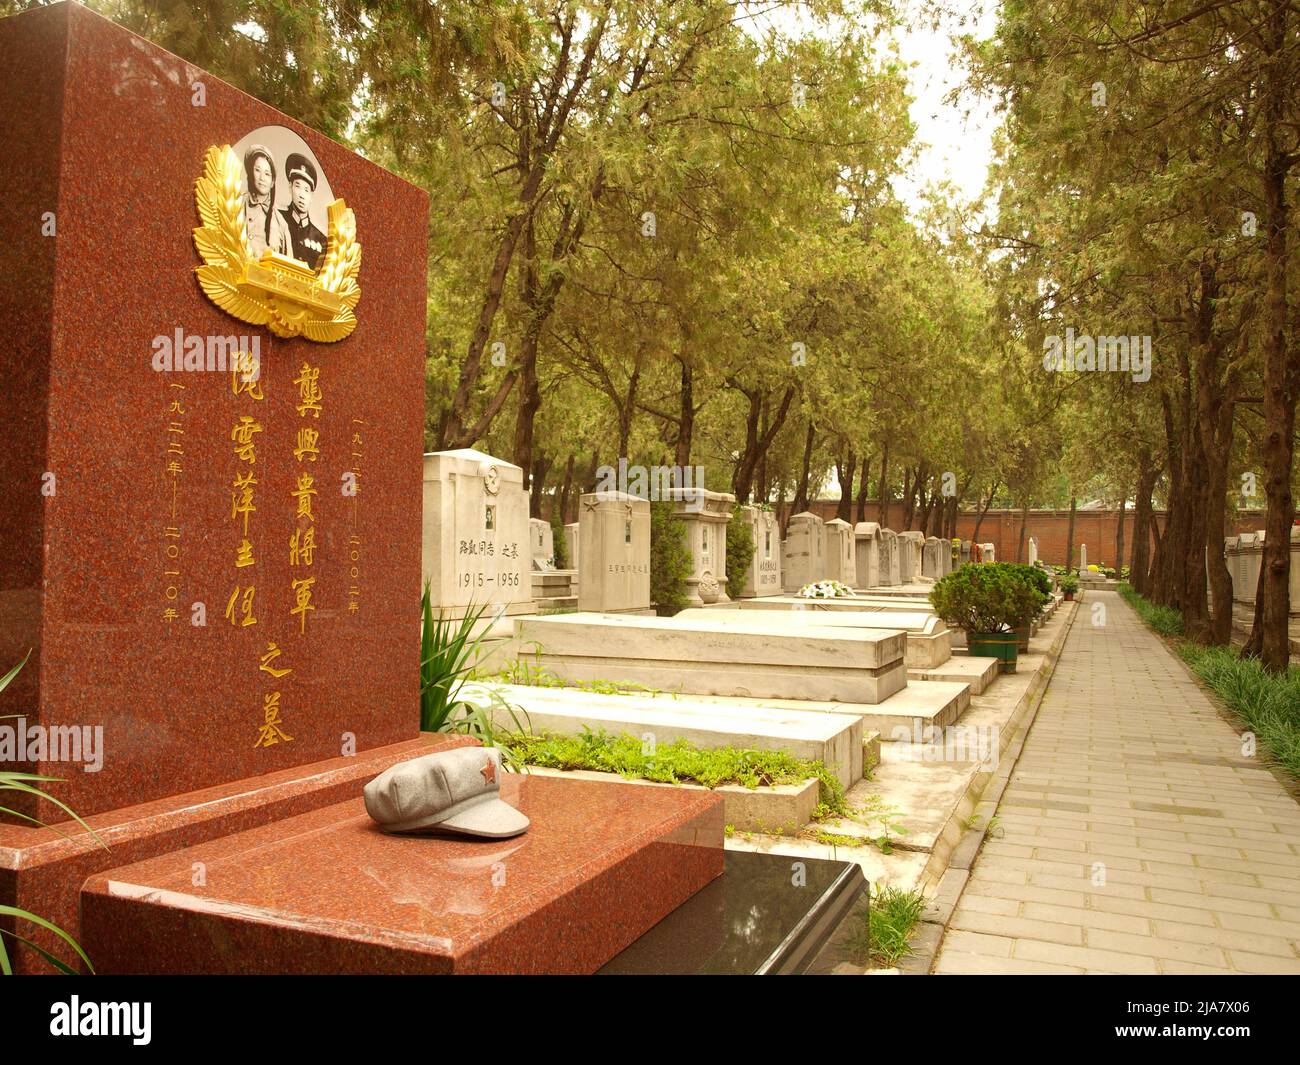 Tomb of Gong Xinggui, a military commander and his wife Wei Yunping. He took part of the “Long March”. The Babaoshan cemetery is designated for the burial of high ranking communist party officers, revolutionary heroes and official friends of the people of China. Stock Photo